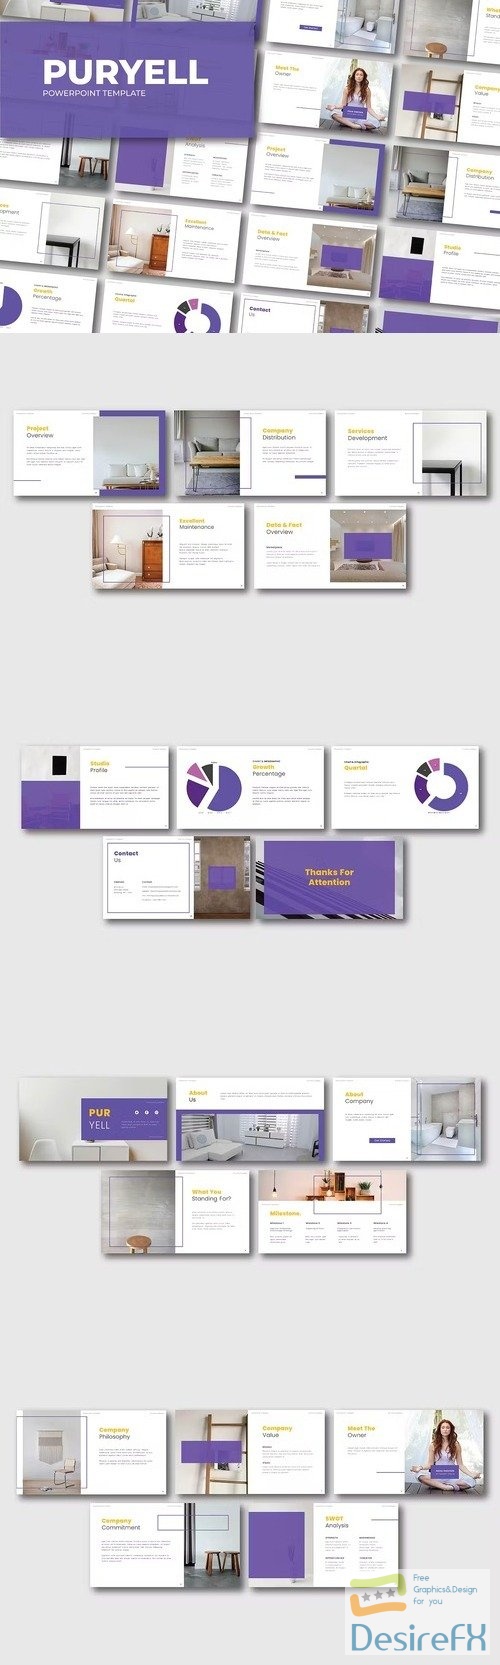 PURYELL Powerpoint Template